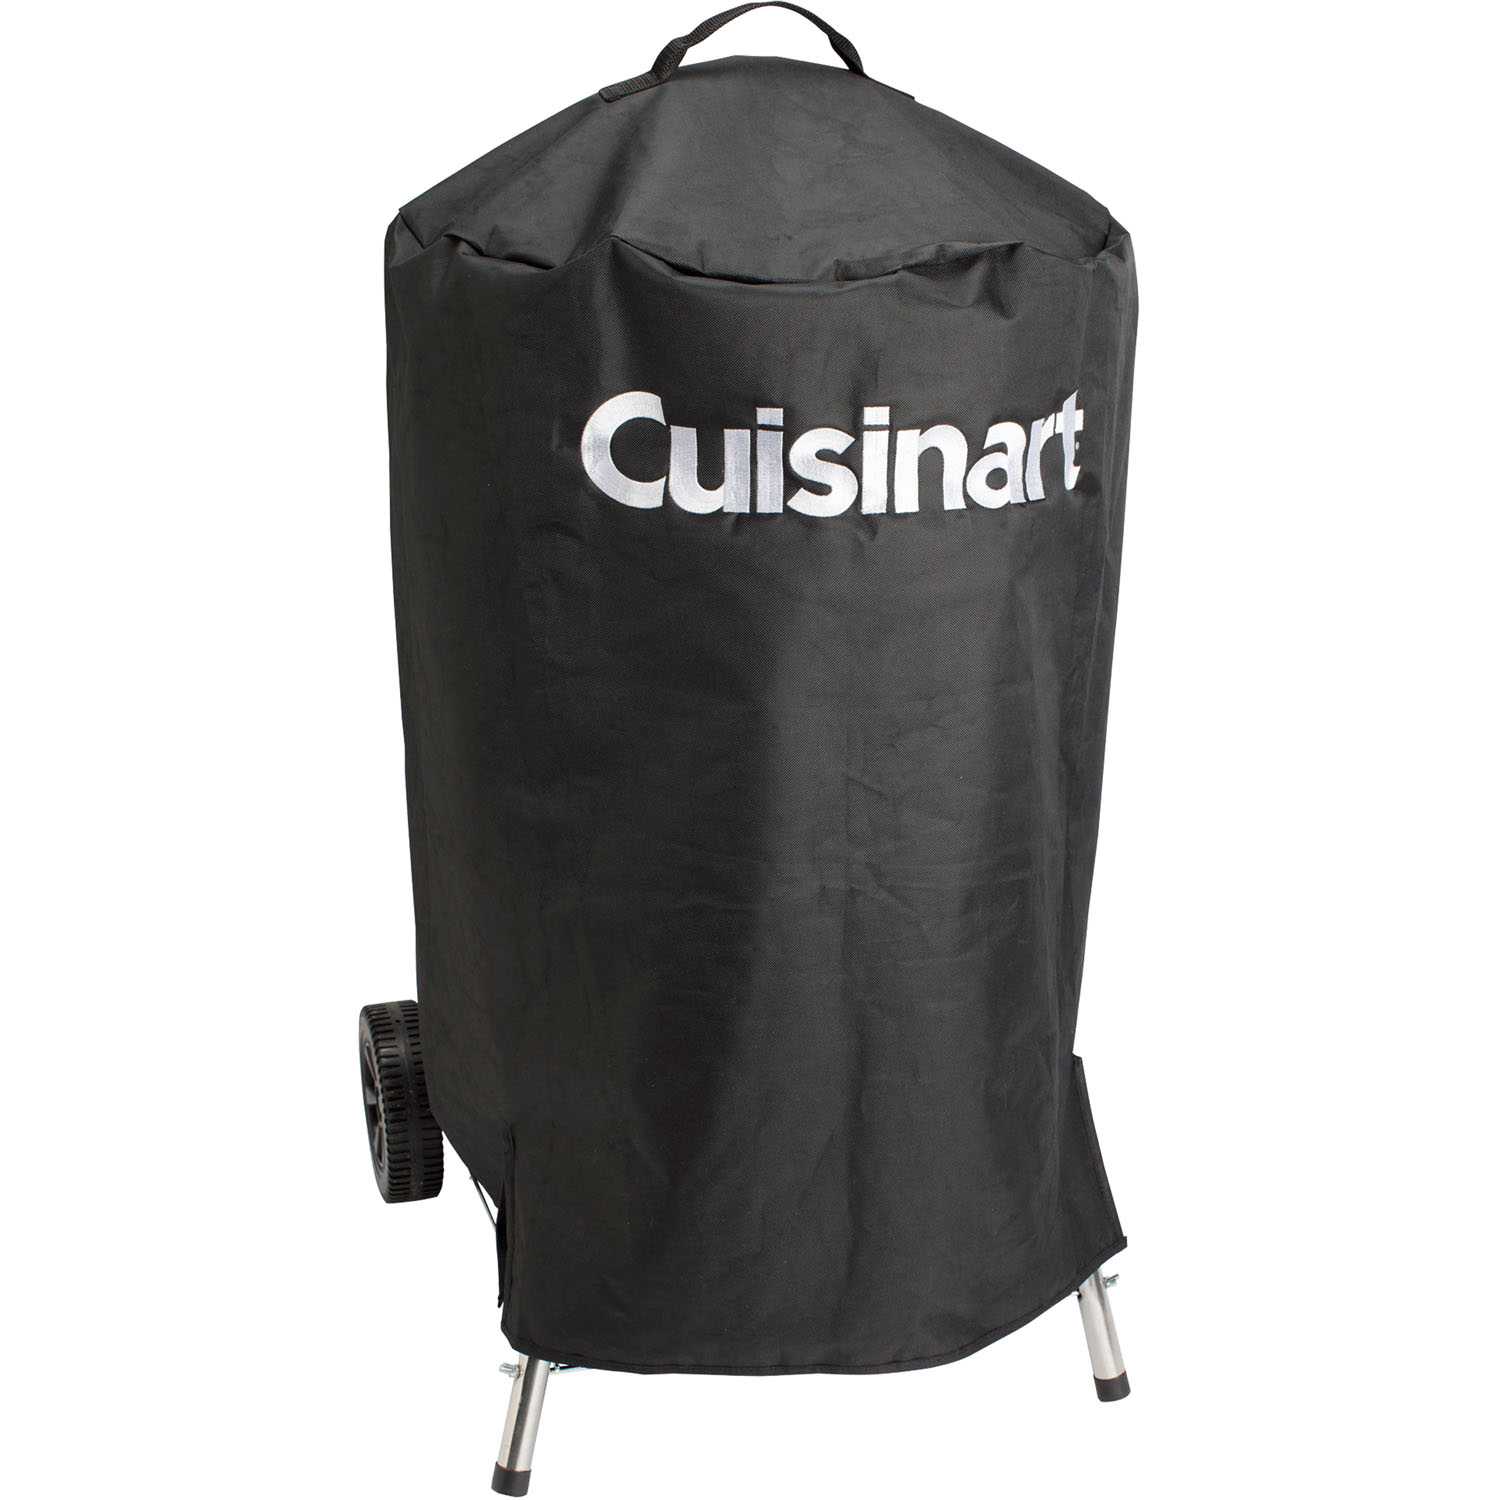 Cuisinart Universal Grill Cover for 18" Kettle Grill, 18" Vertical Smoker, and Other 18" Kettle Grills - image 1 of 3